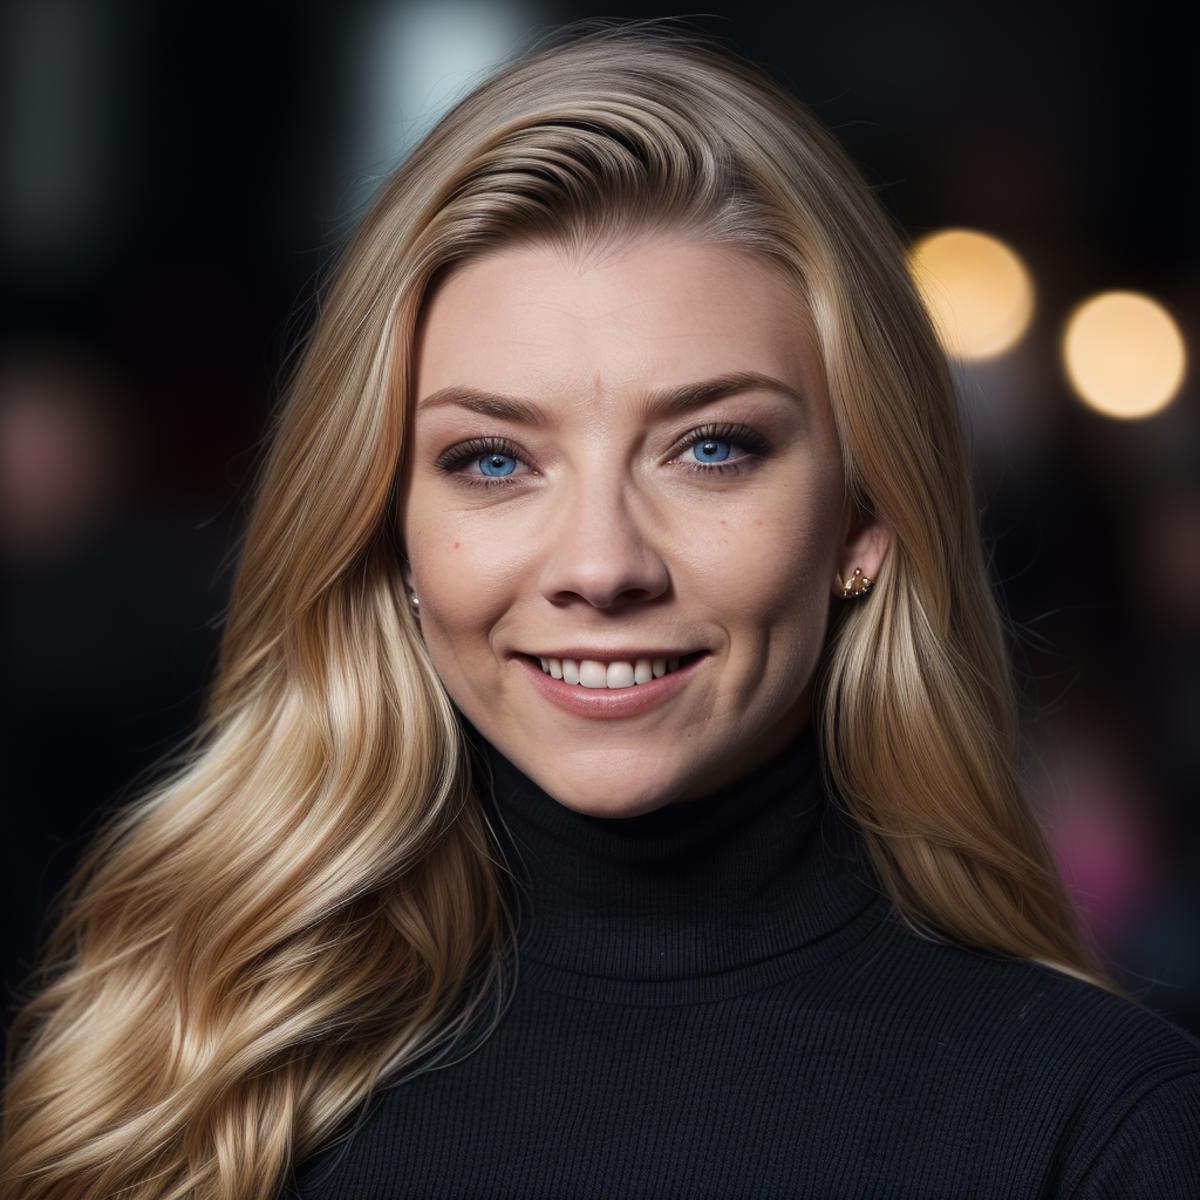 Natalie Dormer image by infamous__fish